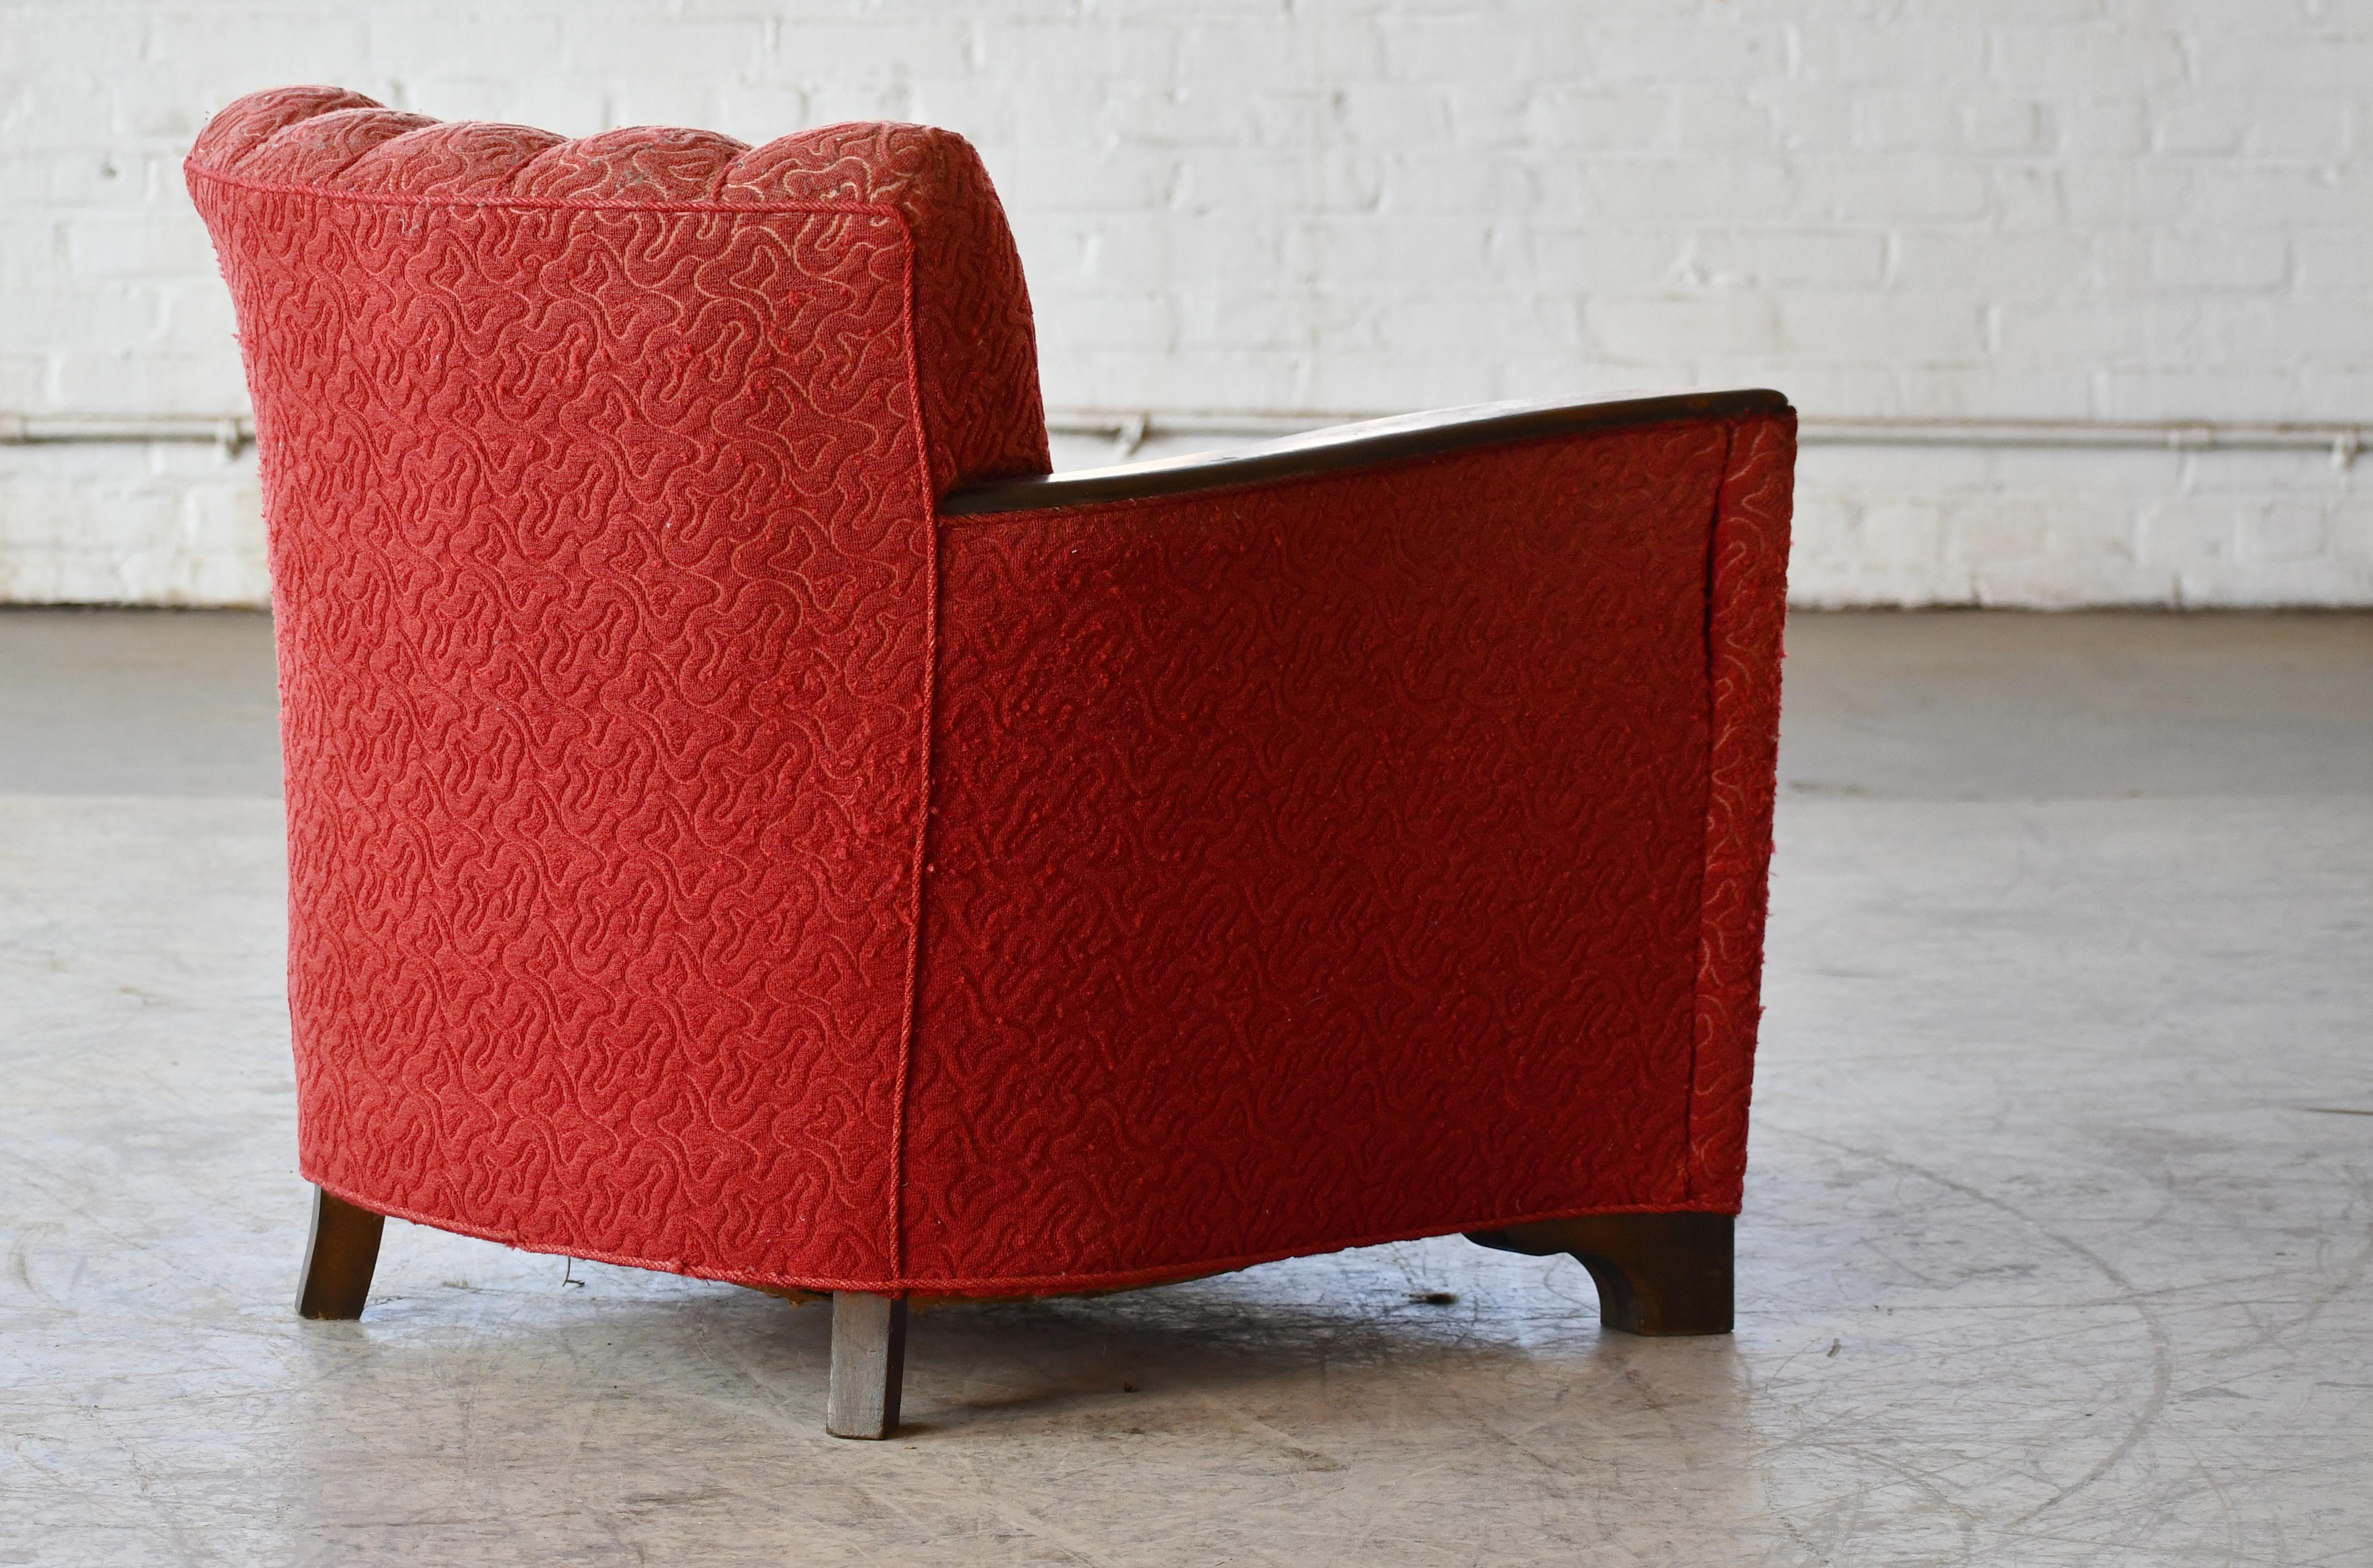 Danish 1930s Art Deco Lounge Chair in Red Mohair with Mahogany Accents For Sale 5